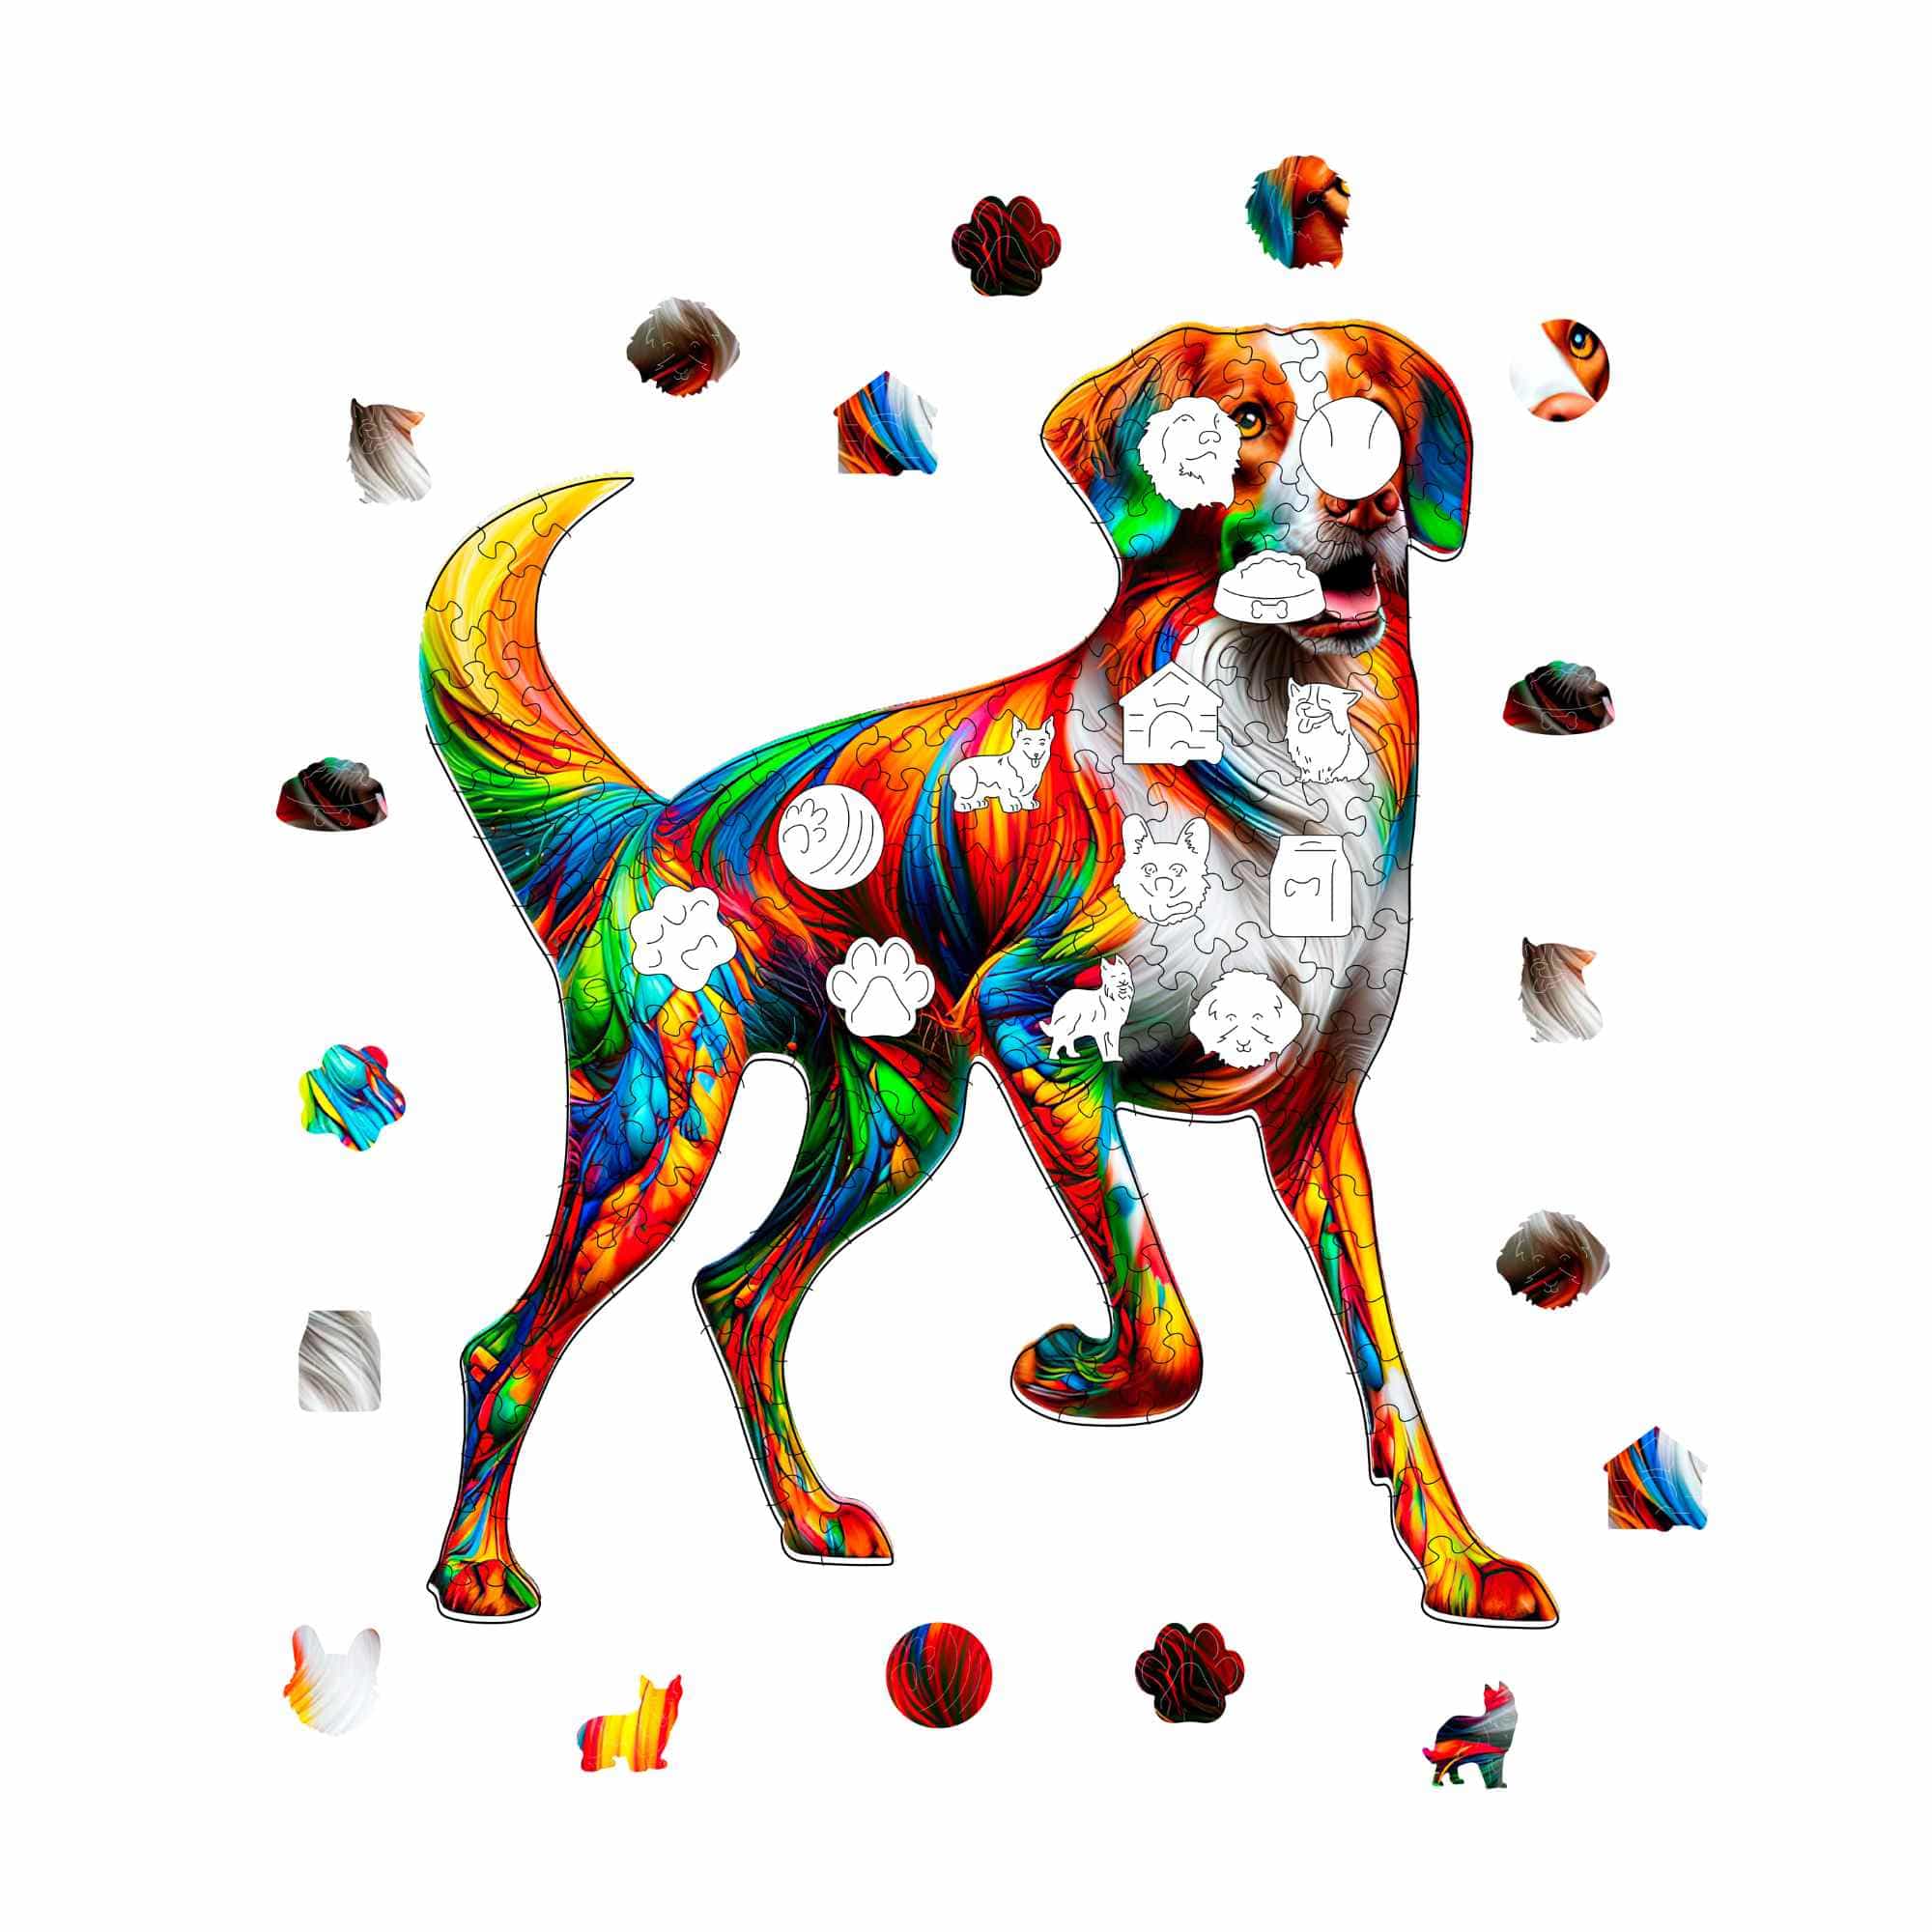 Animal Jigsaw Puzzle > Wooden Jigsaw Puzzle > Jigsaw Puzzle Brittany Dog - Jigsaw Puzzle